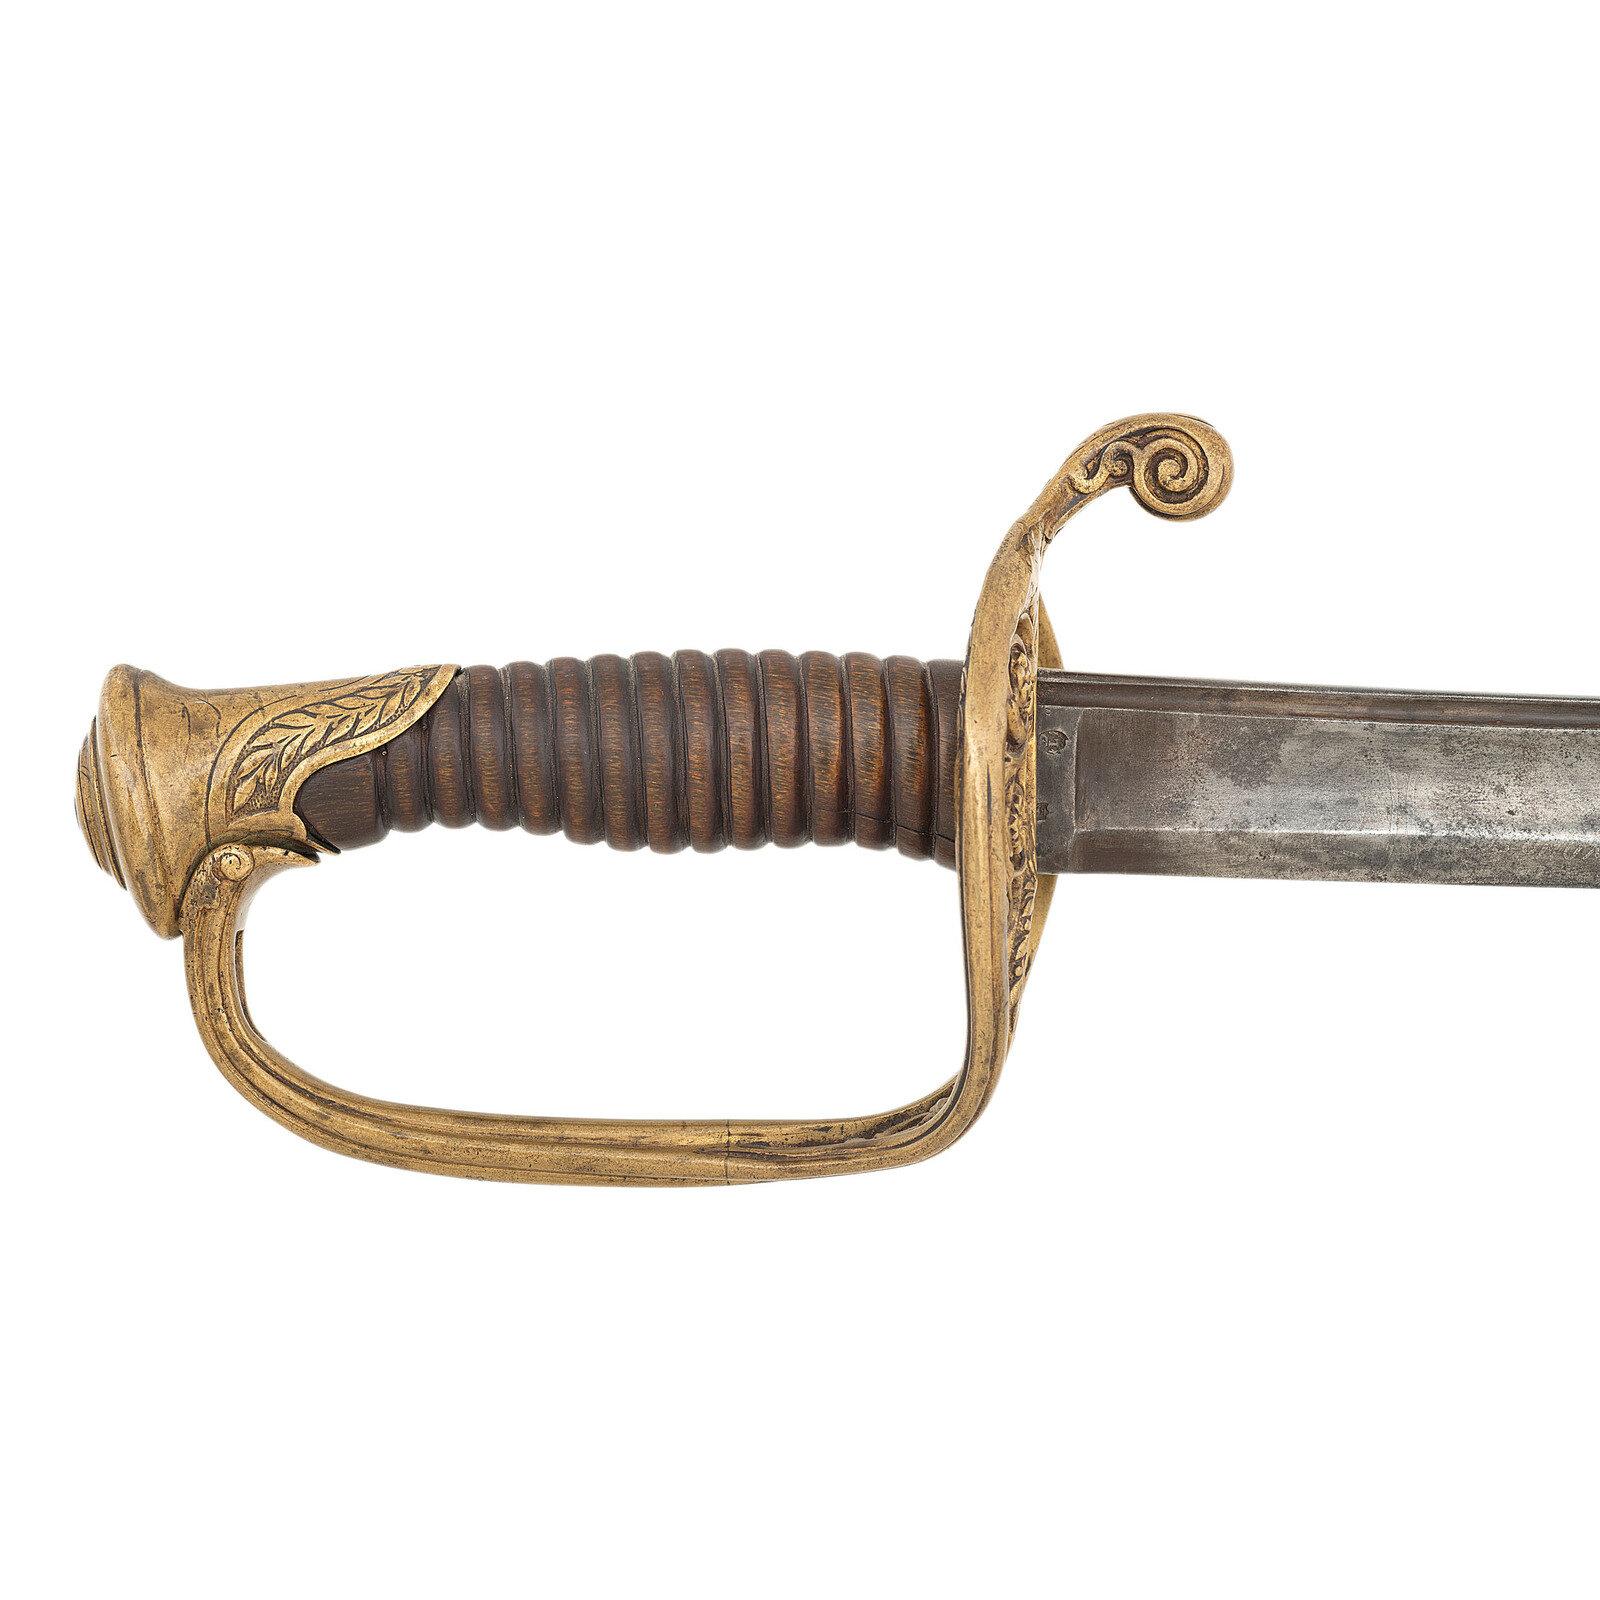 French Import Foot Officers Sword of Lt. Col. John C. Black - Congressional Medal of Honor Recipient